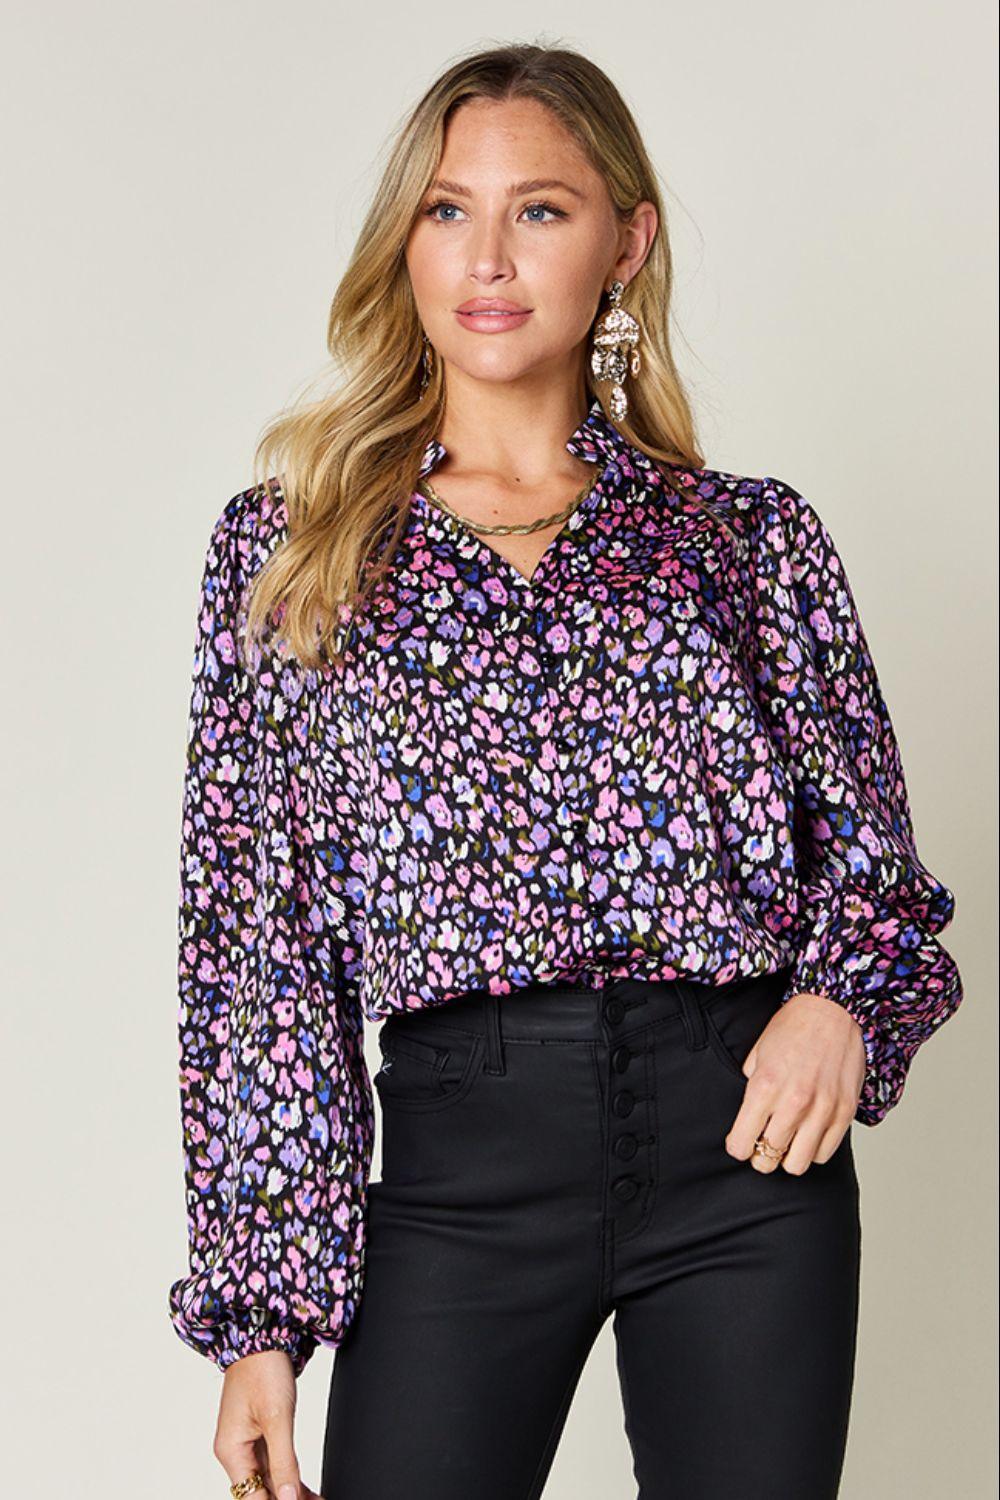 Double Take Full Size Printed Long Sleeve Blouse Purple Shirts & Tops